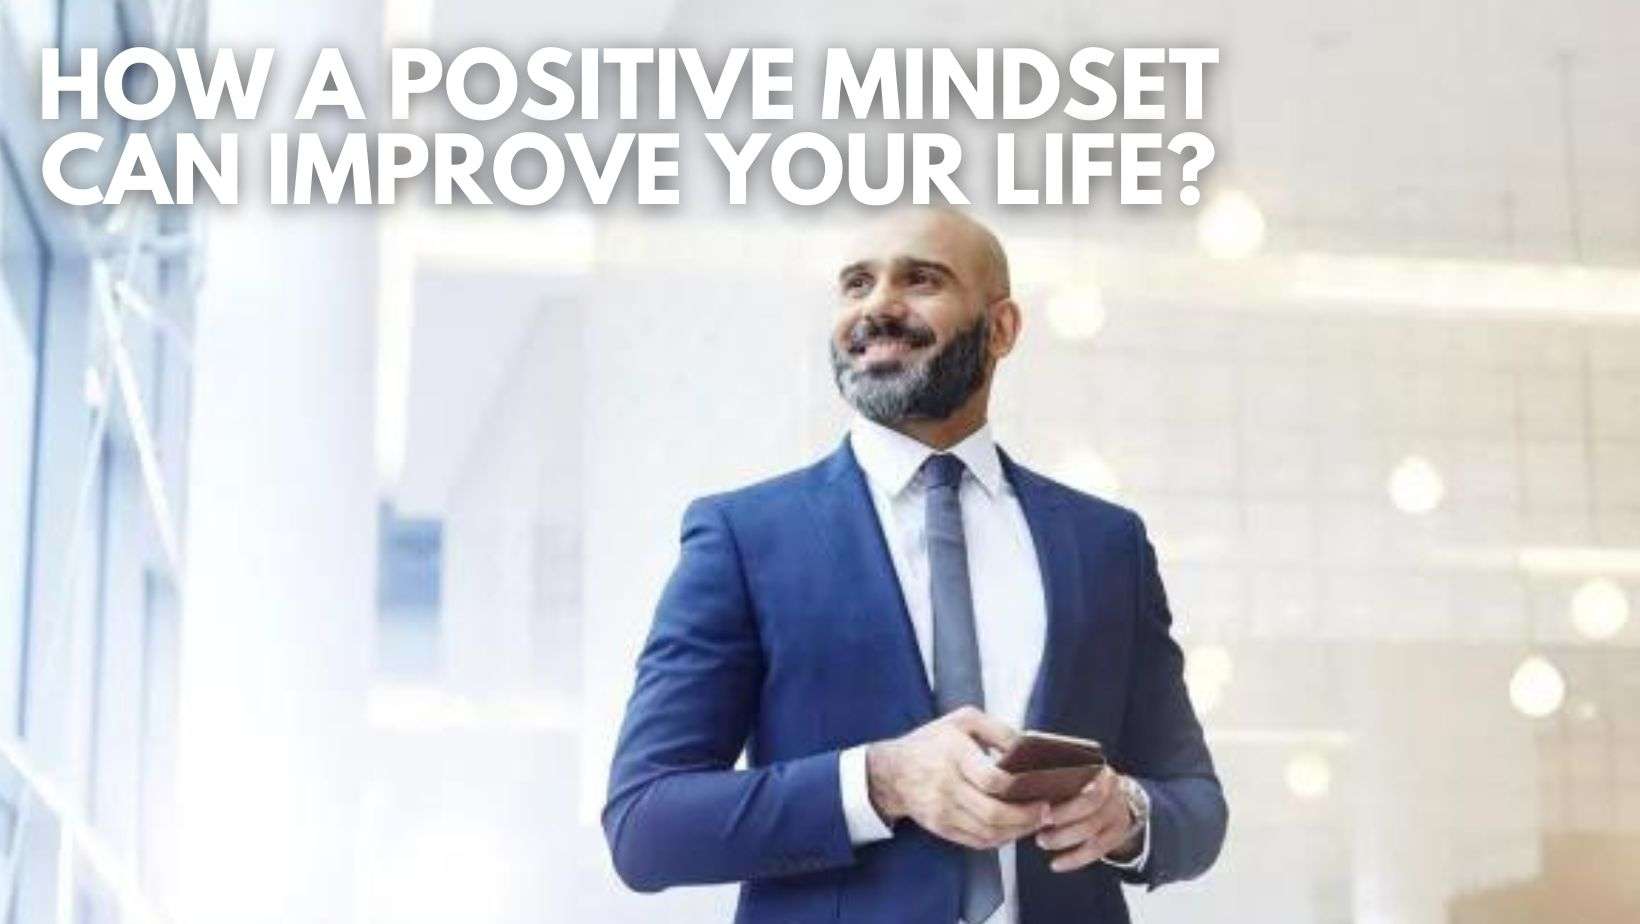 How A Positive Mindset Can Improve Your Life 7 What Is Power of Positive Thinking?